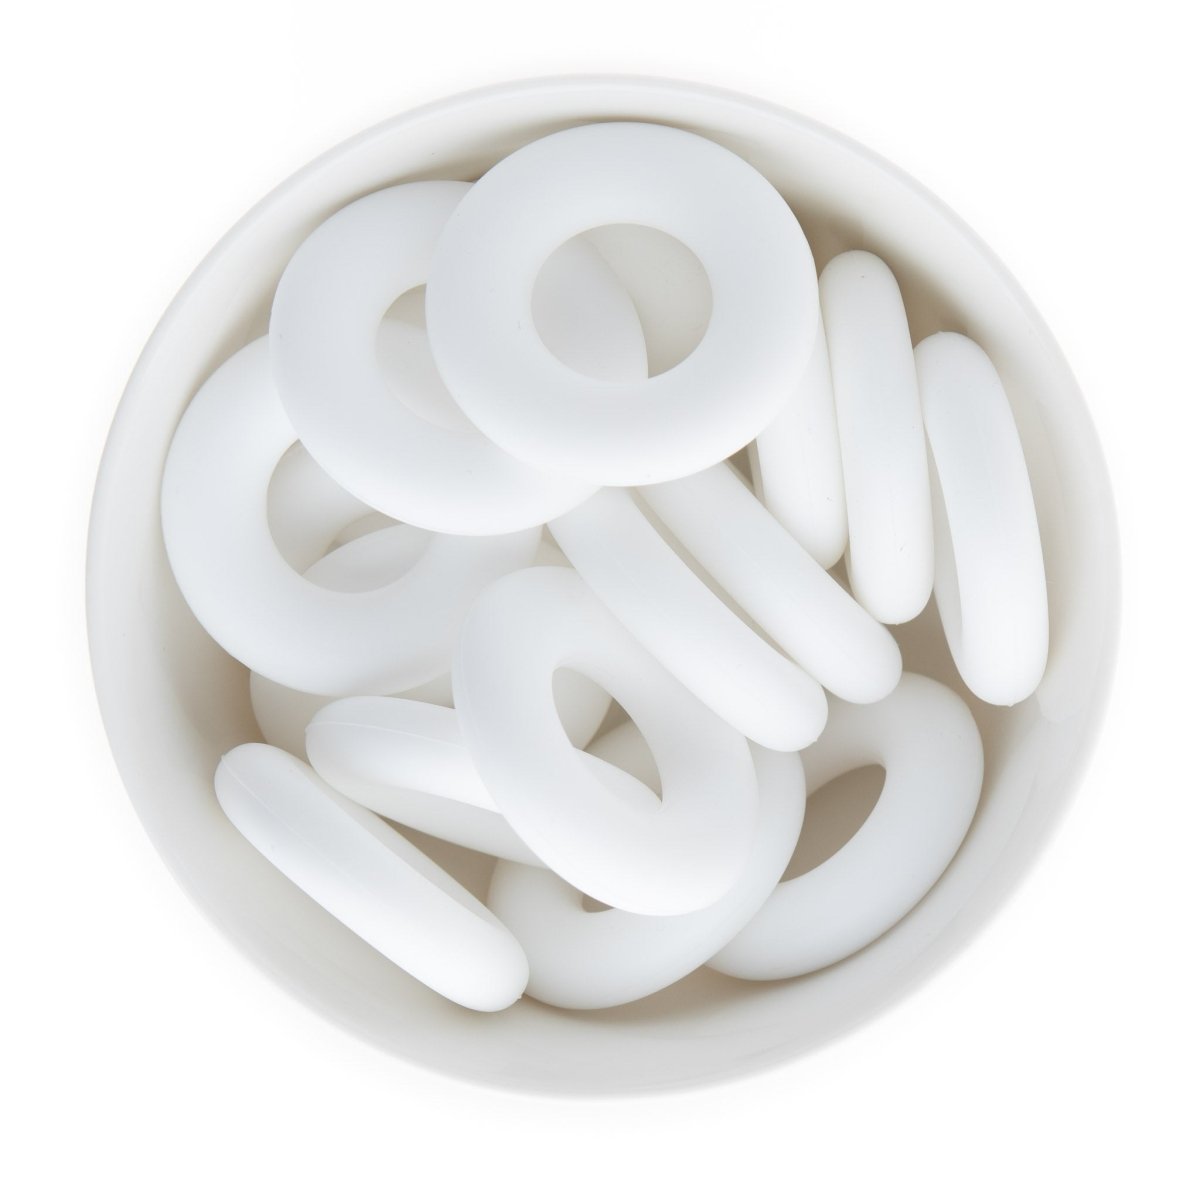 Silicone Teethers and Pendants Donuts White from Cara & Co Craft Supply